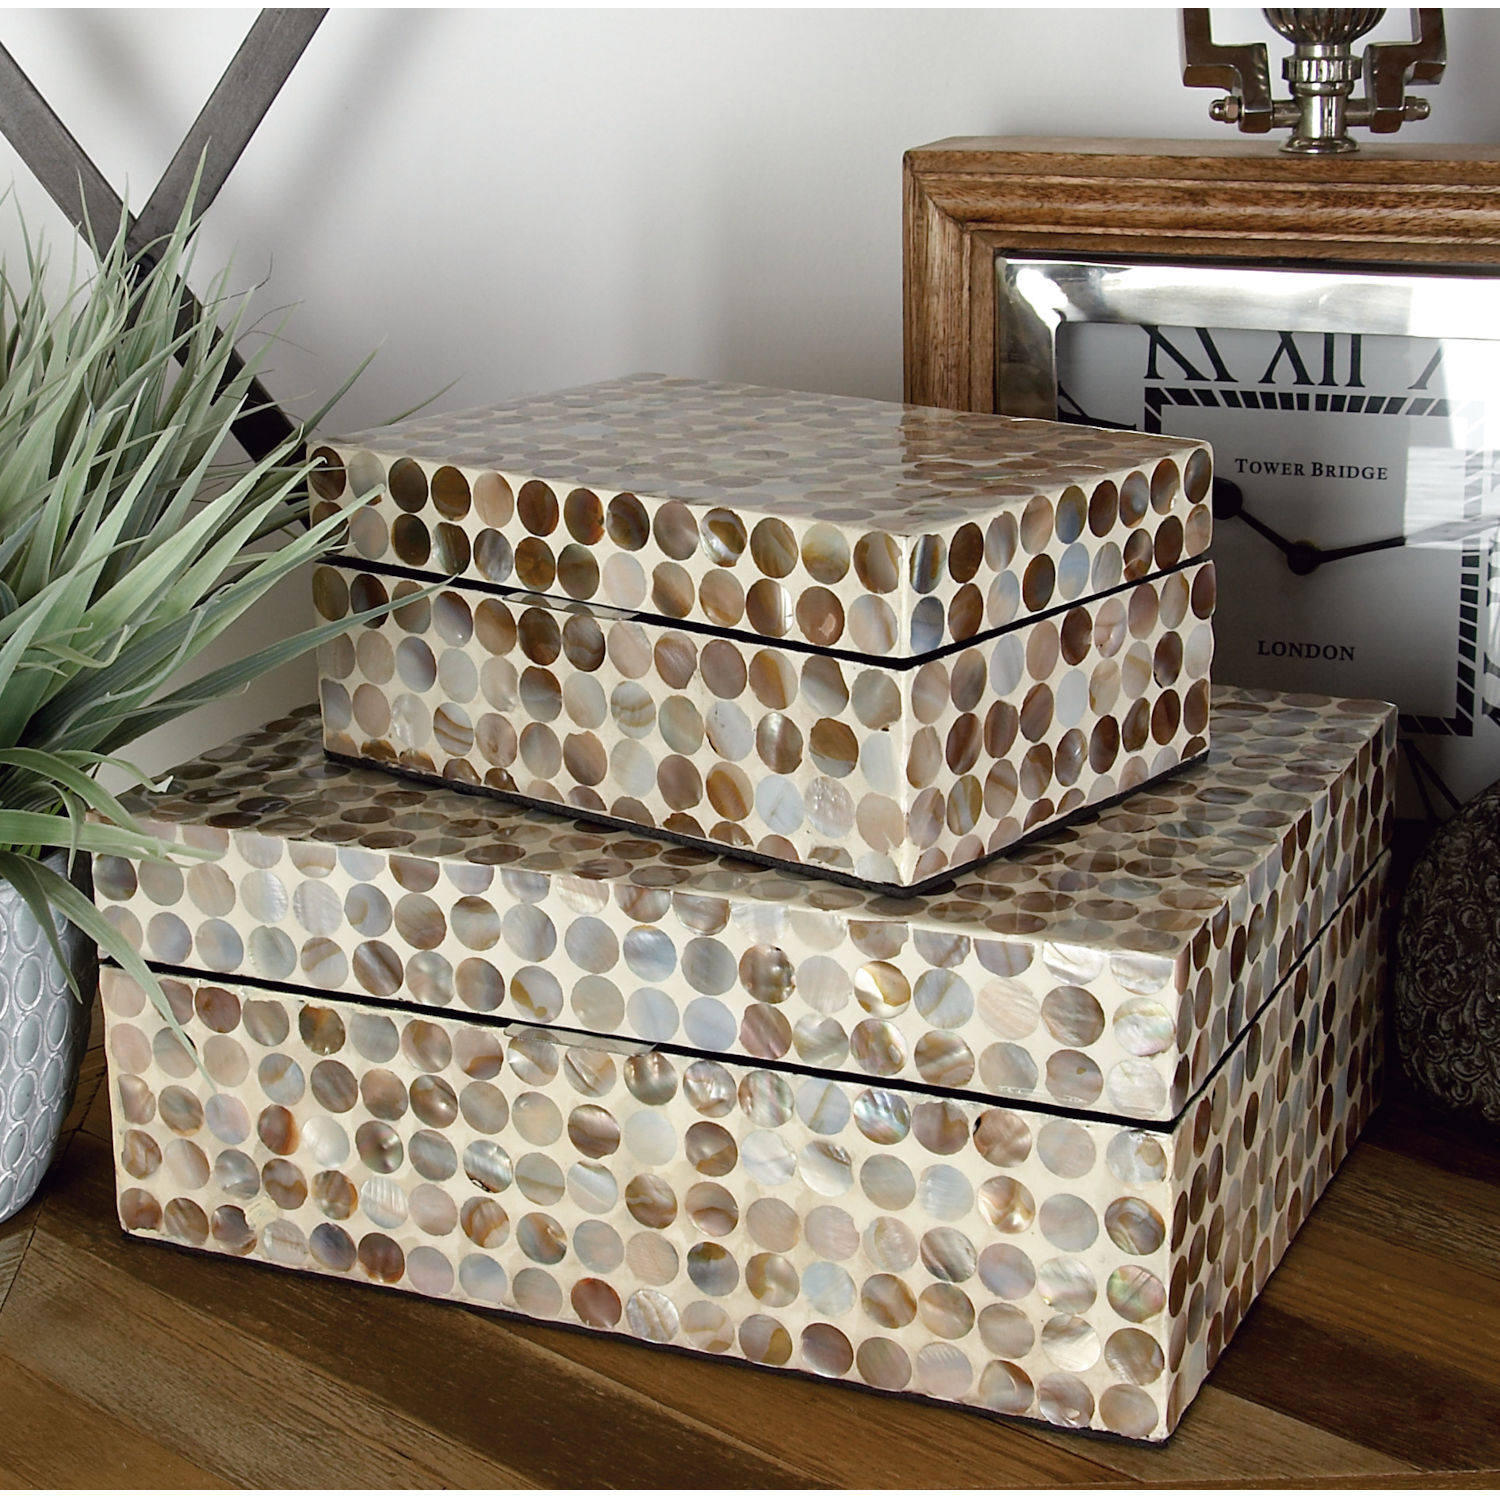 Share more than 80 best decorative boxes - seven.edu.vn